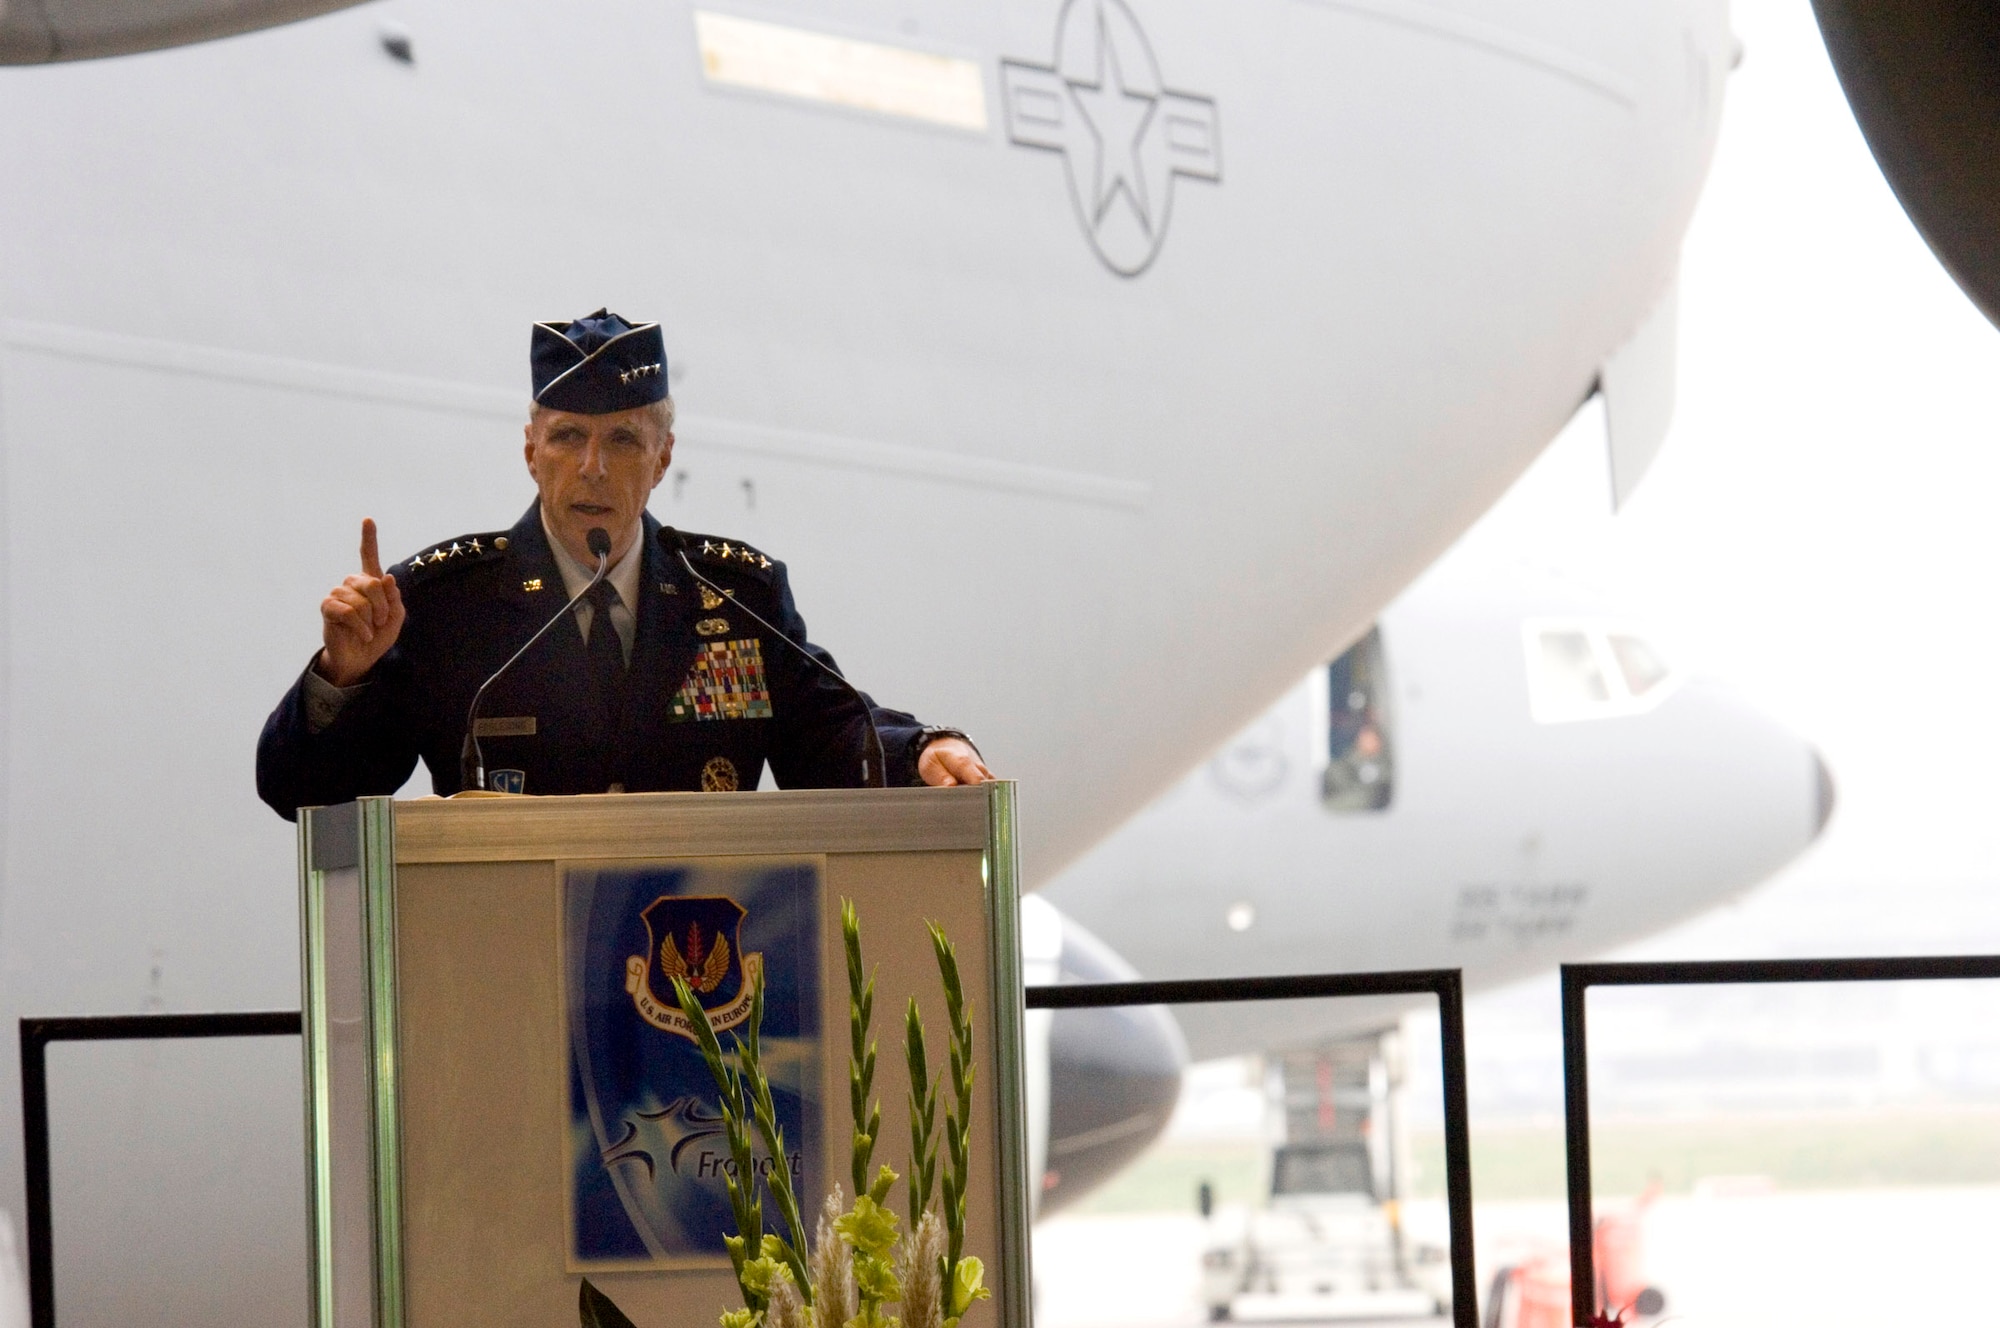 RHEIN-MAIN AIR BASE, Germany -- Gen. Robert H. "Doc" Foglesong, U.S. Air Forces in Europe commander, speaks at the ceremonial closing of this longtime airlift base Oct. 10. For 60 years the base in Frankfurt was the Air Force's "Gateway to Europe." The Air Force will turn the base over to the Frankfurt Airport Authority in December. (U.S. Air Force photo by Master Sgt. John E. Lasky)